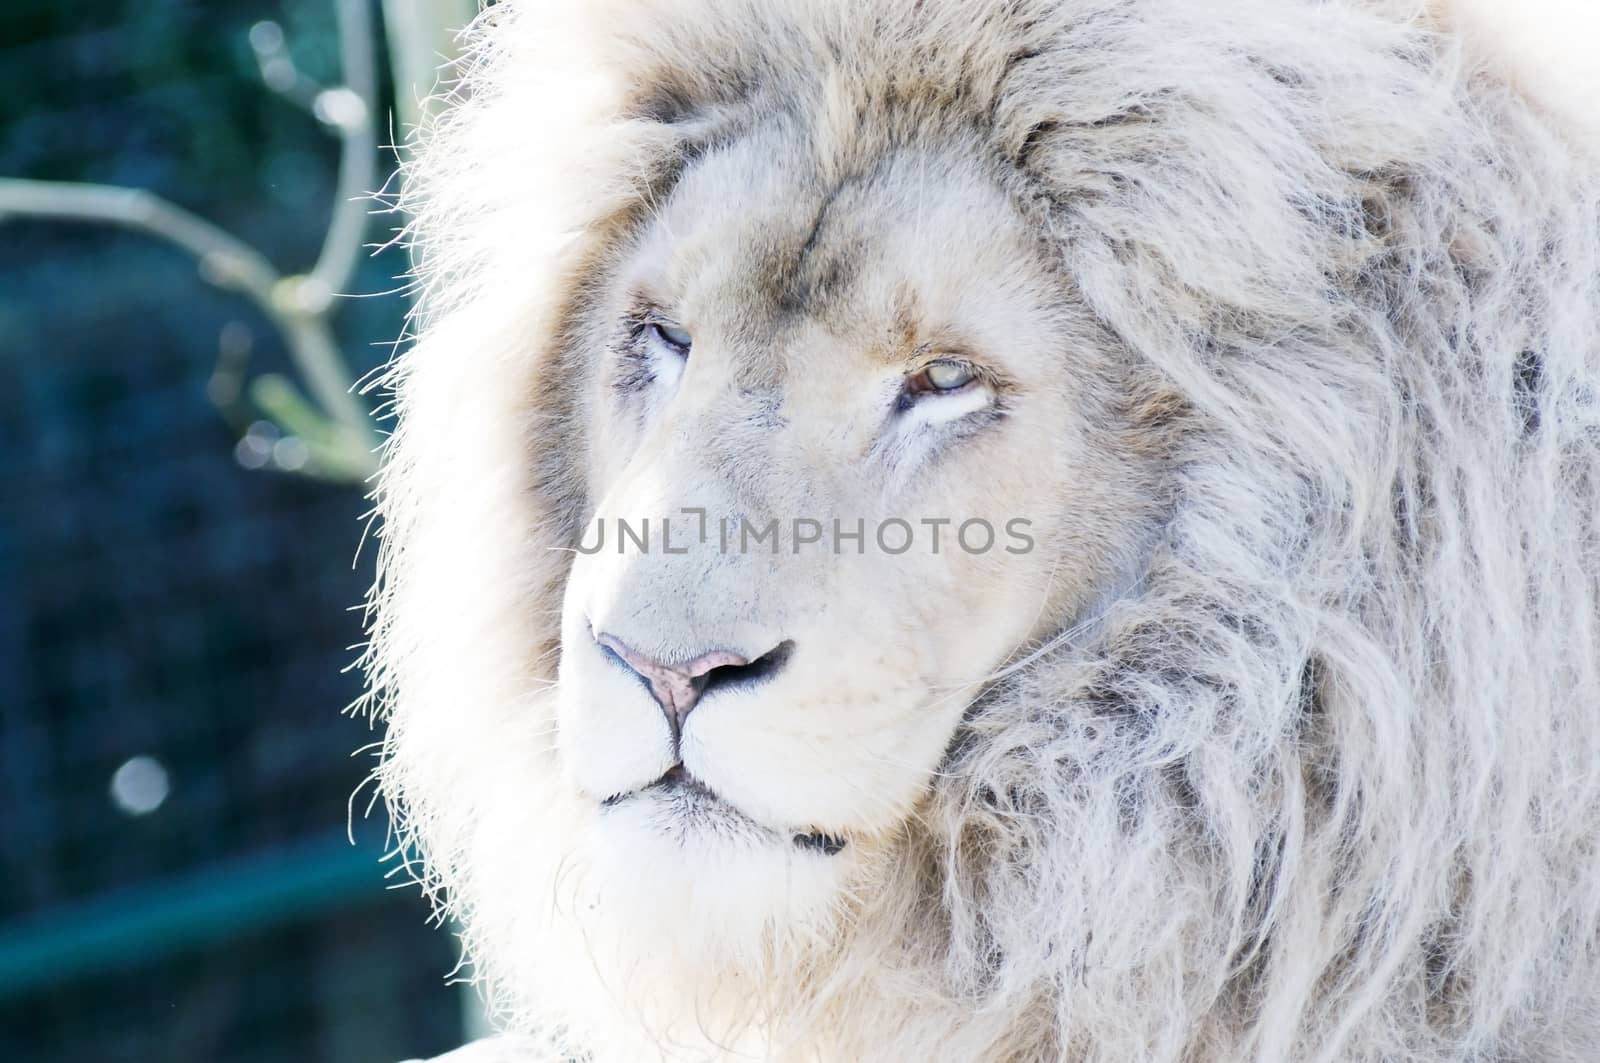 Male white lion closeup of face showing fur and mane detail